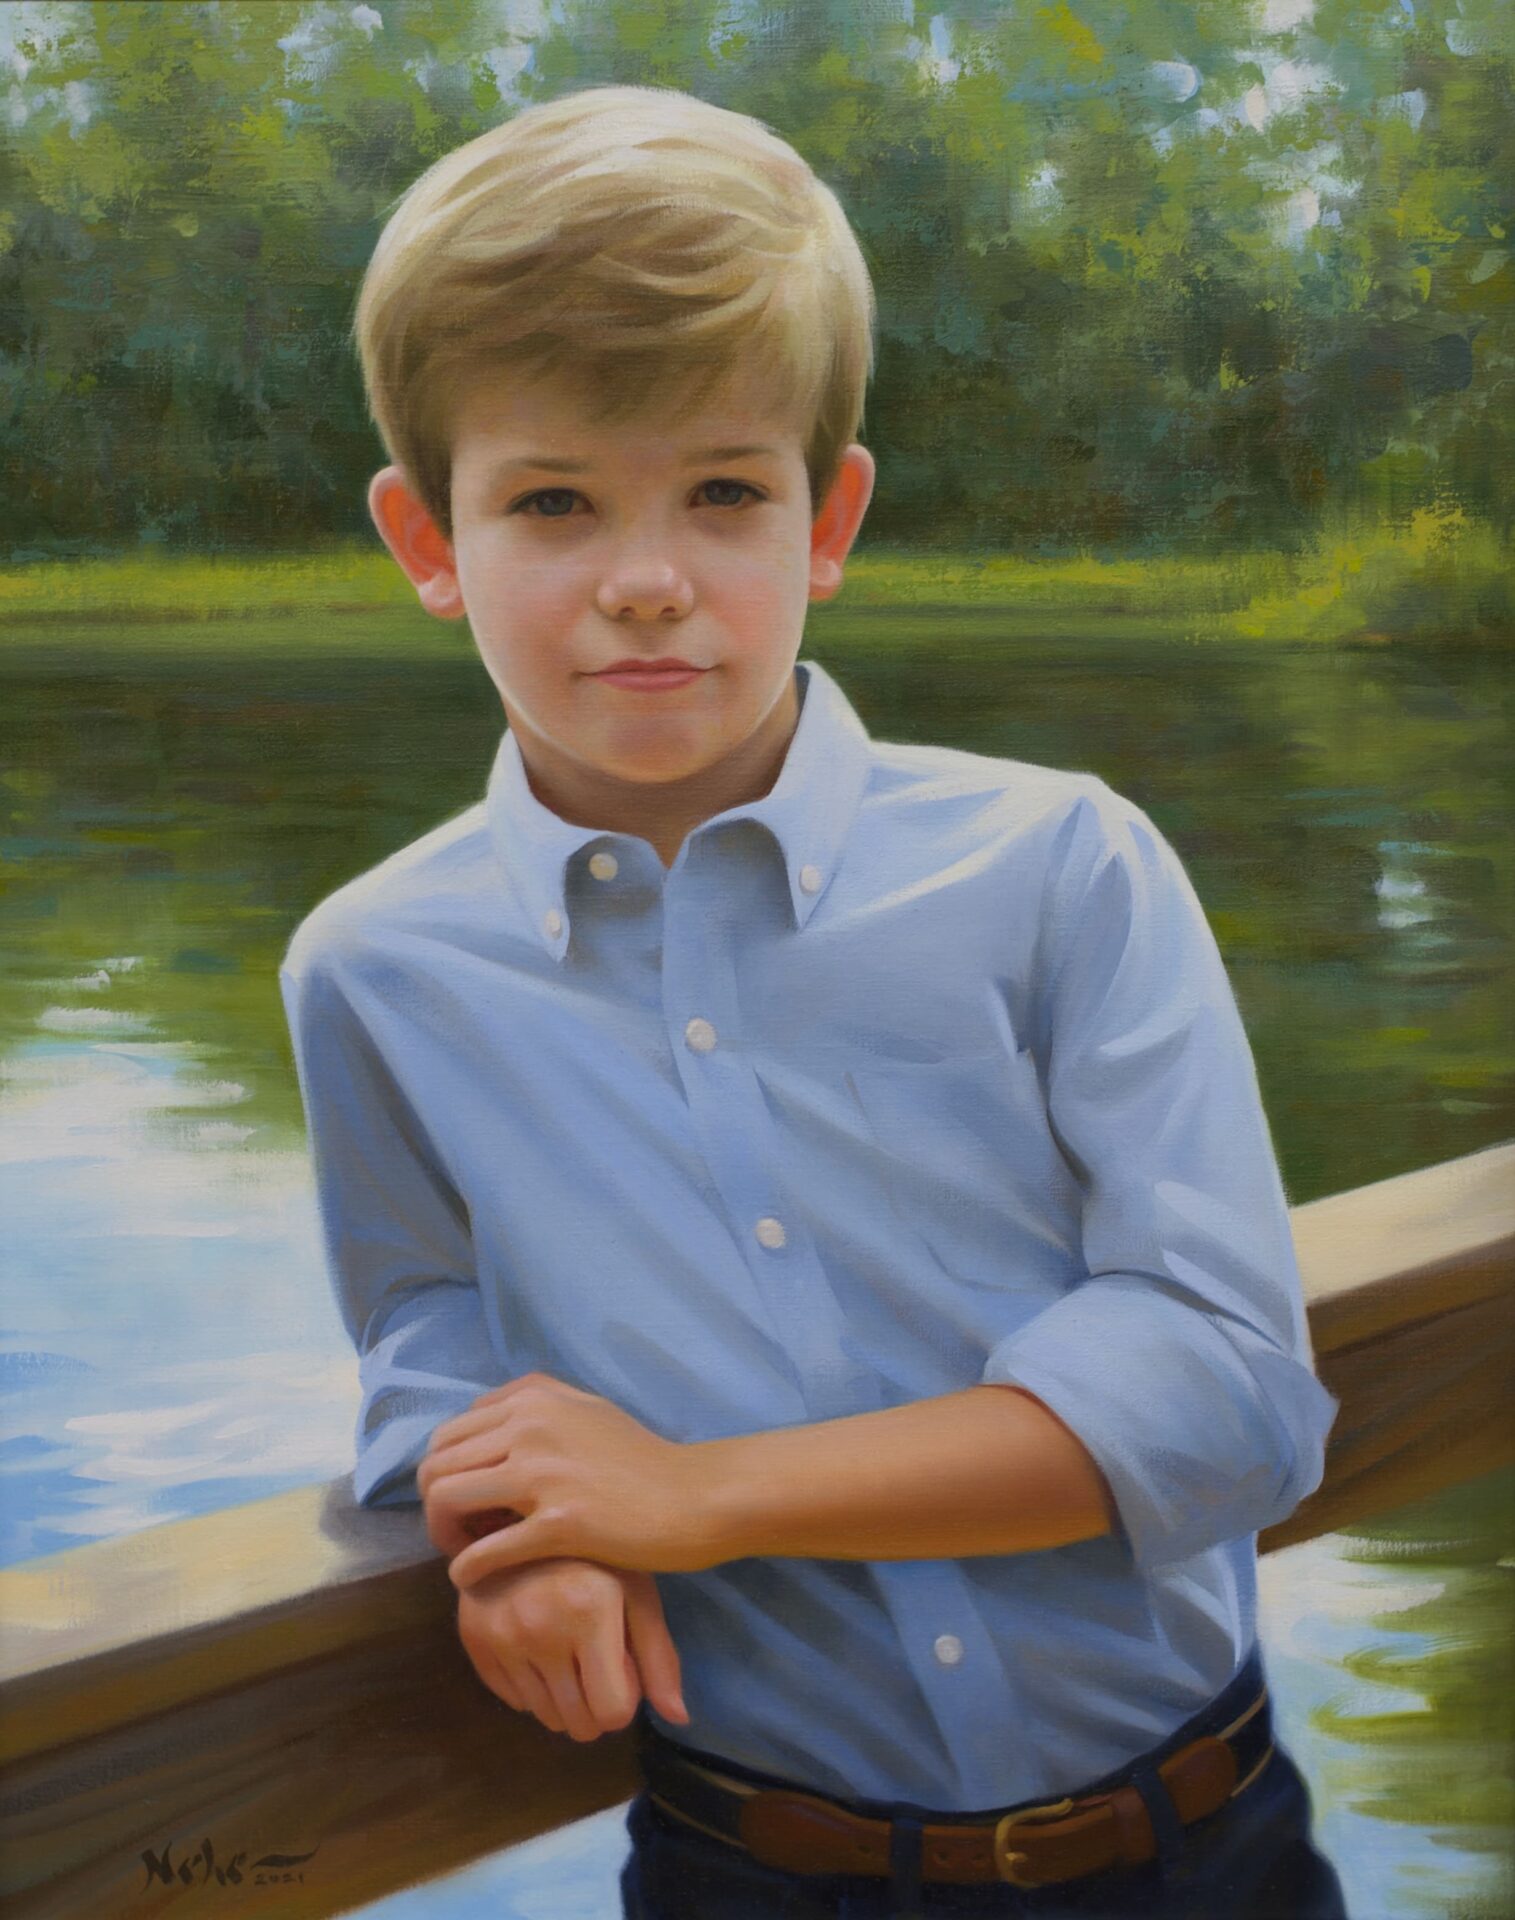 A portrait painting of a young boy